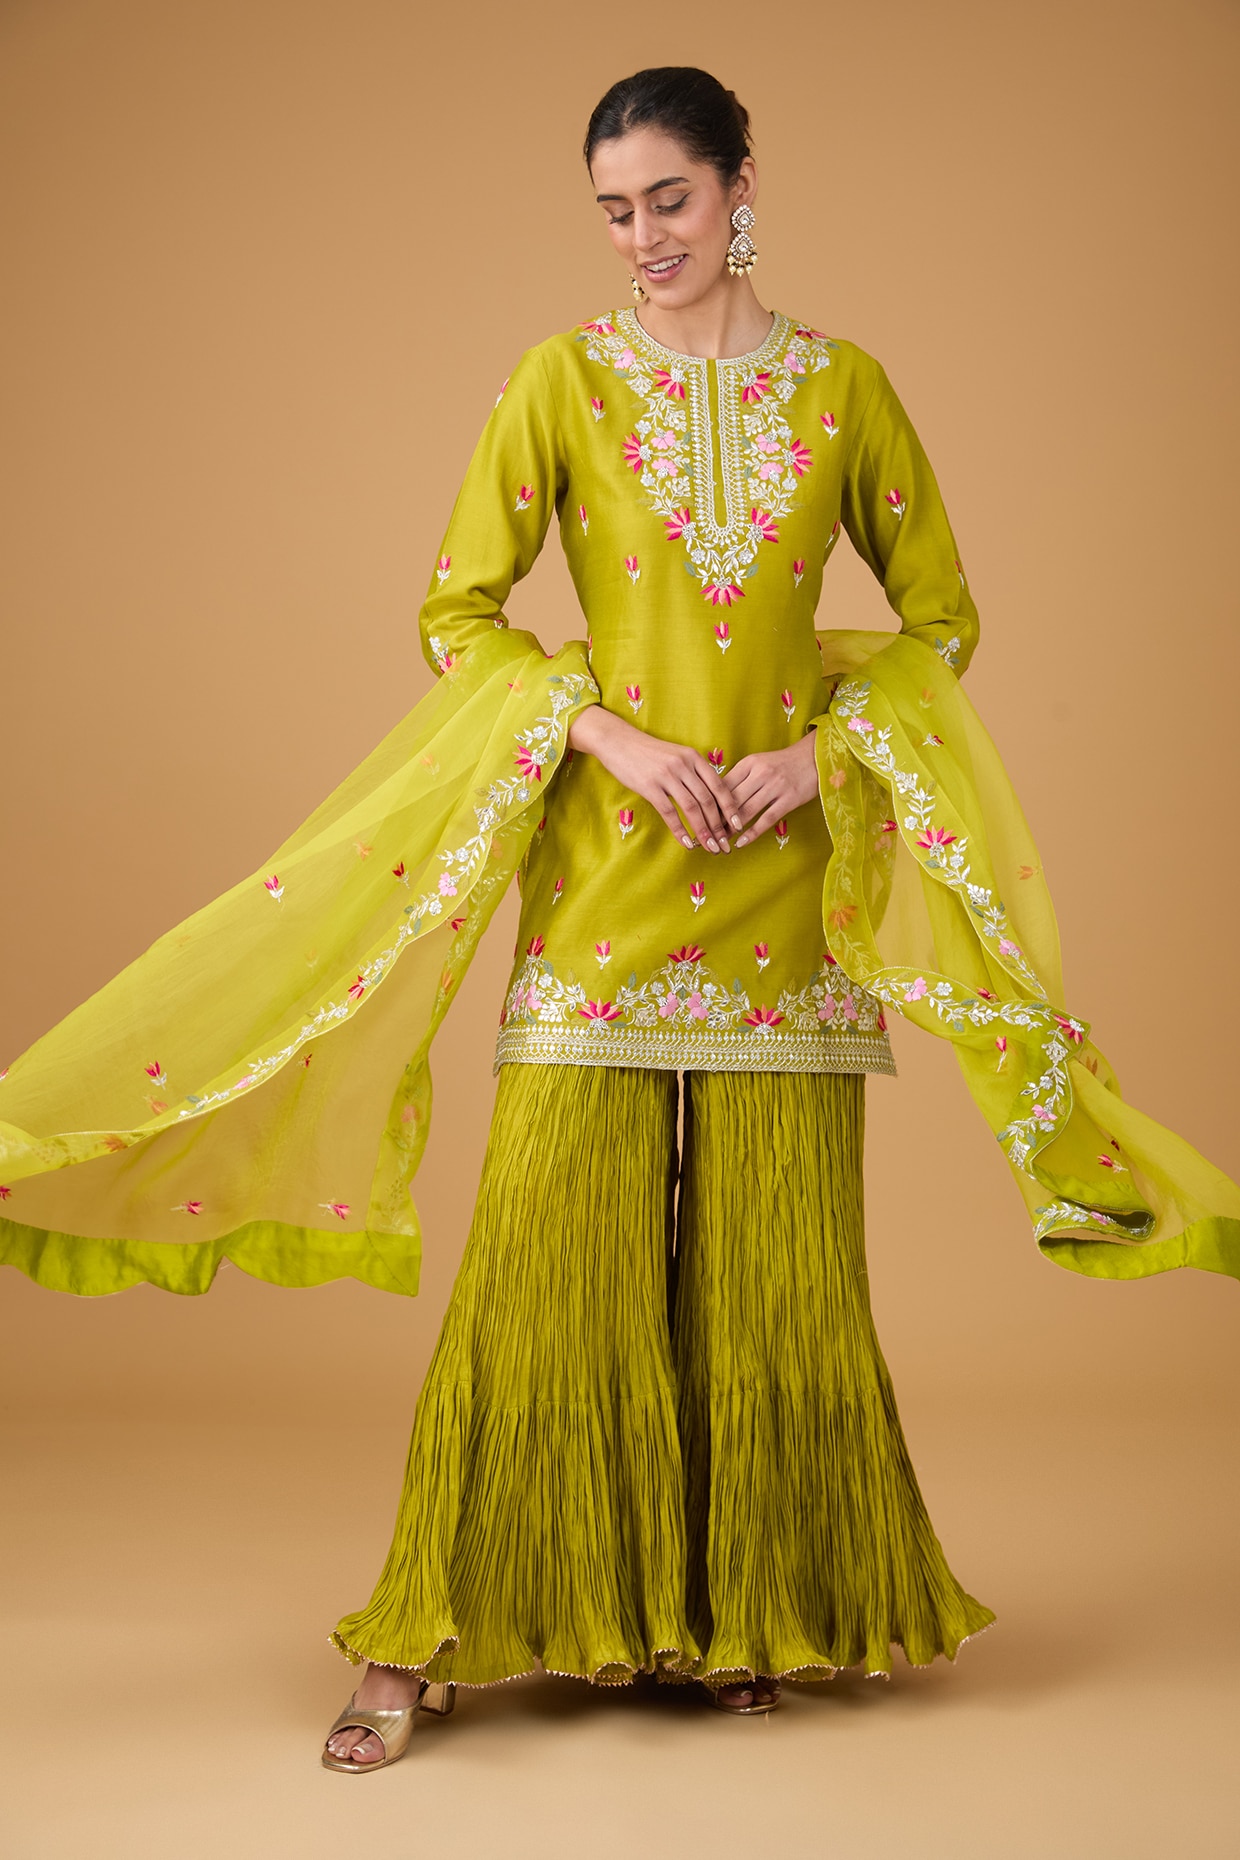 Shop Haldi Sharara Suit for Women Online from India's Luxury Designers 2024